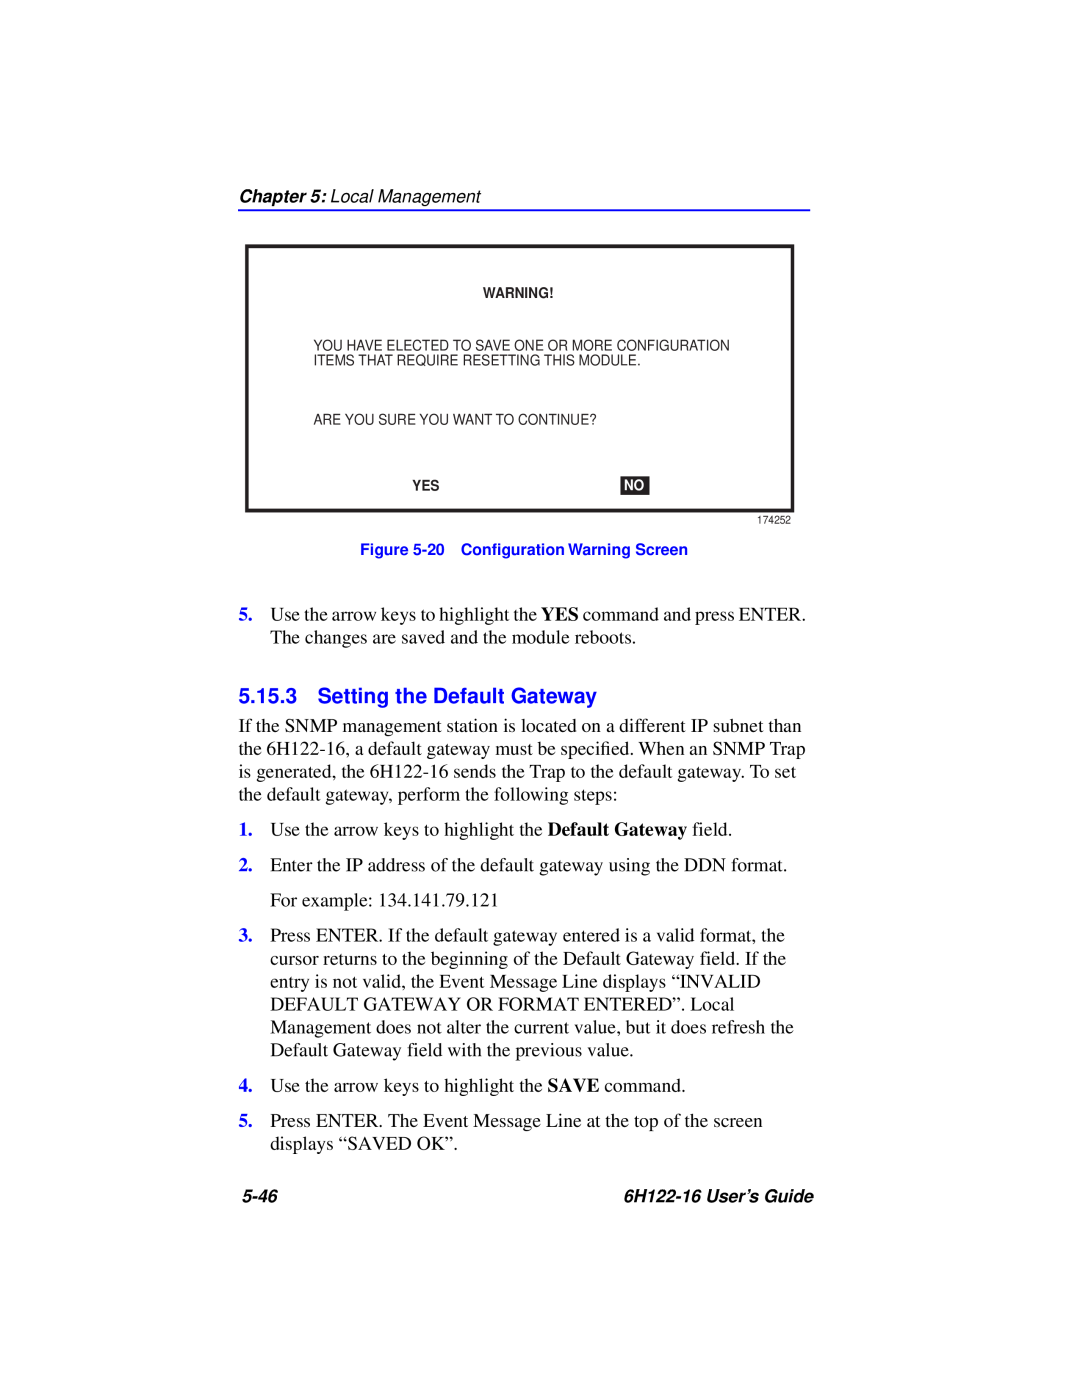 Cabletron Systems 6H122-16 manual Setting the Default Gateway 